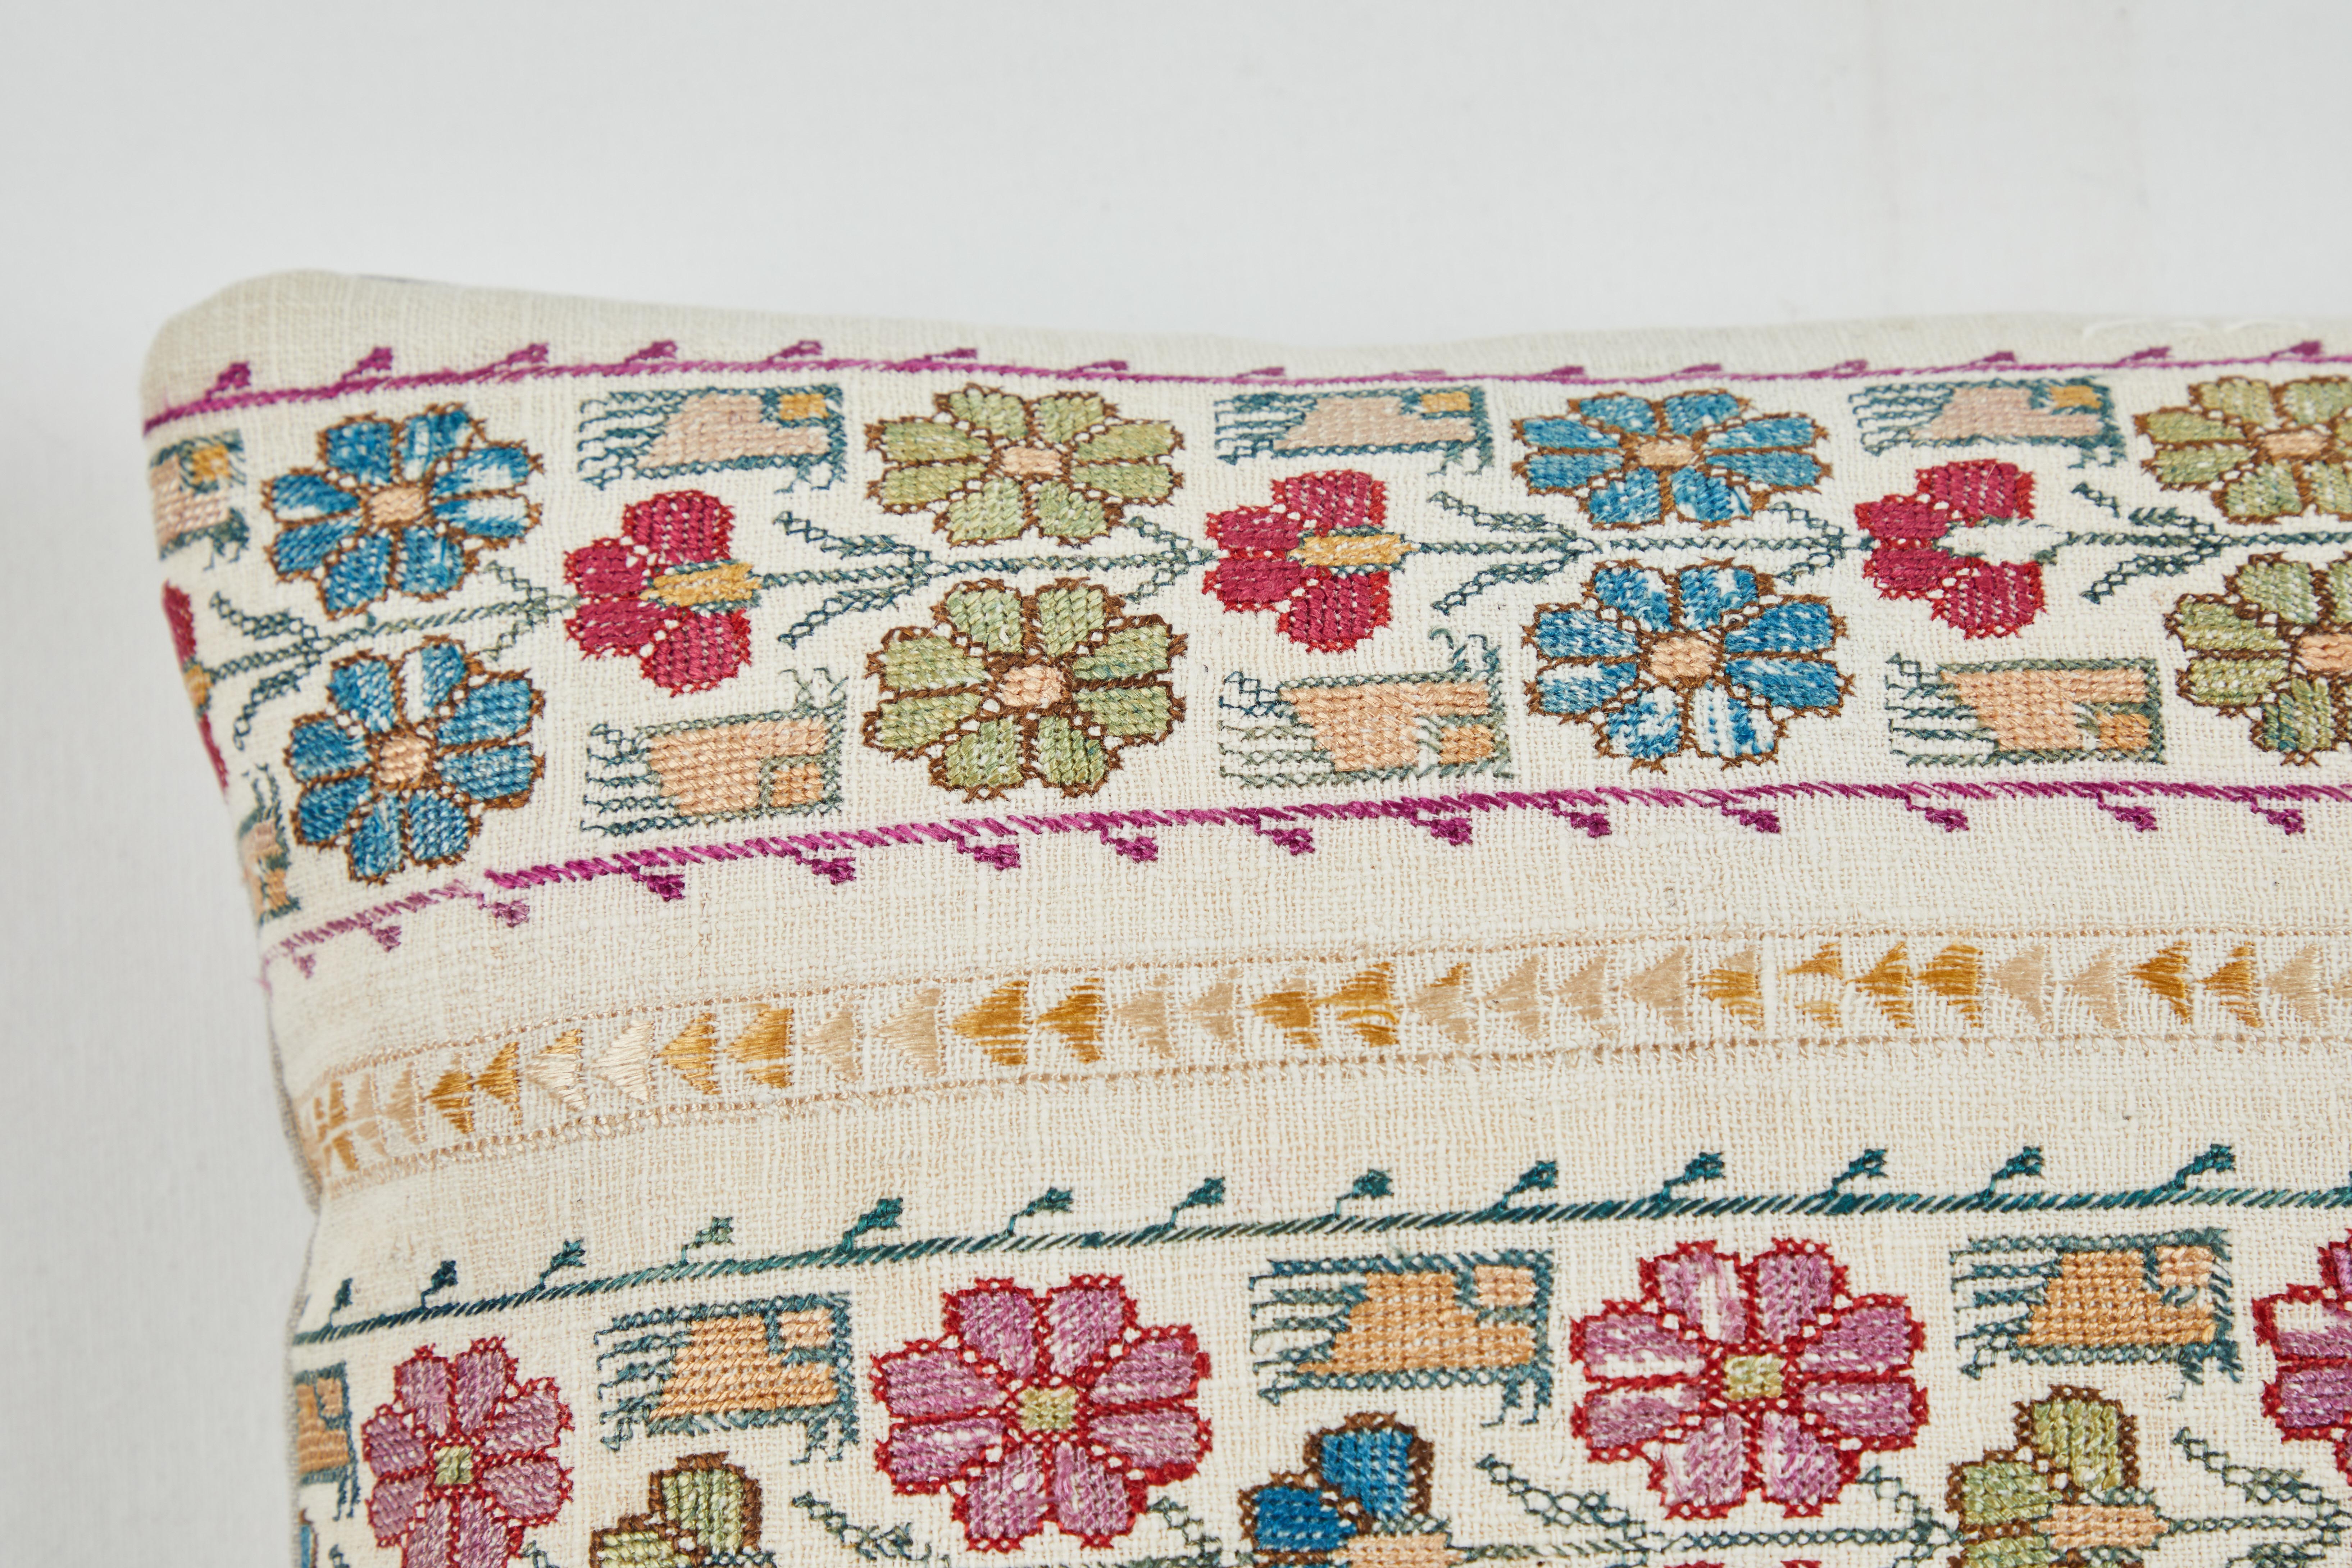 Ottoman influenced handwork pillow. Green, blue, teal, red, pink and gold silk stitching on handwoven linen. Natural linen back, feather and down fill, invisible zipper closure.
 